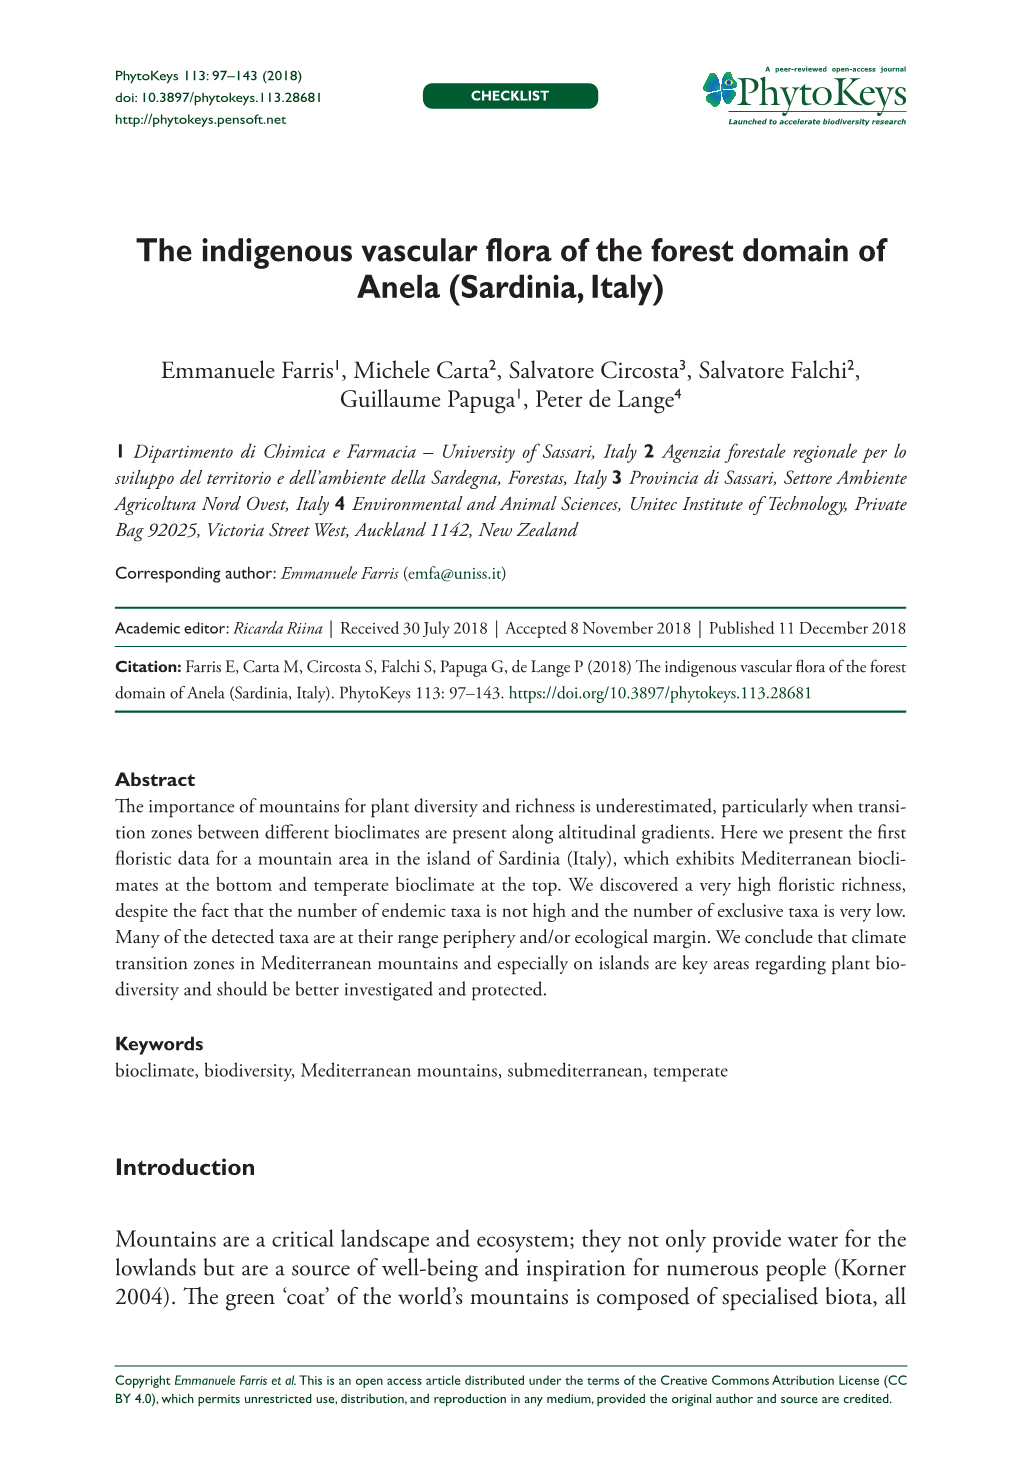 The Indigenous Vascular Flora of the Forest Domain of Anela (Sardinia, Italy)